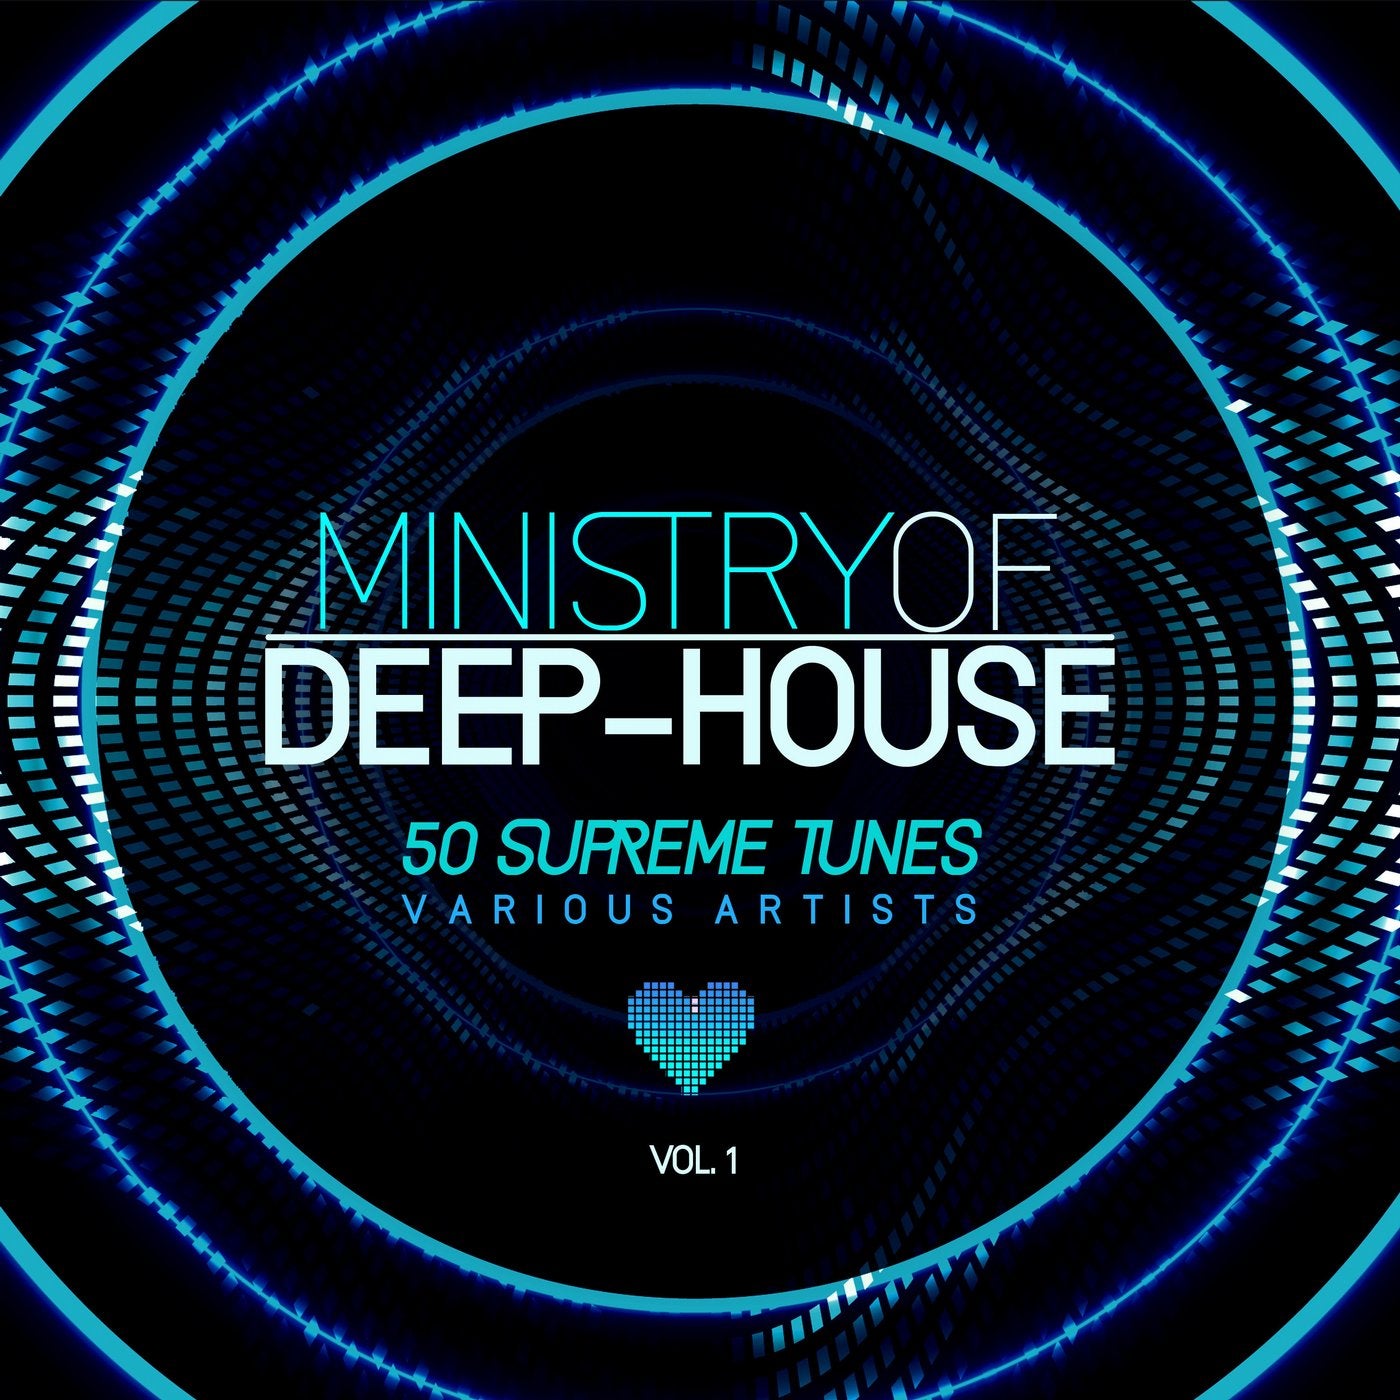 Ministry of Deep-House (50 Supreme Tunes), Vol. 1